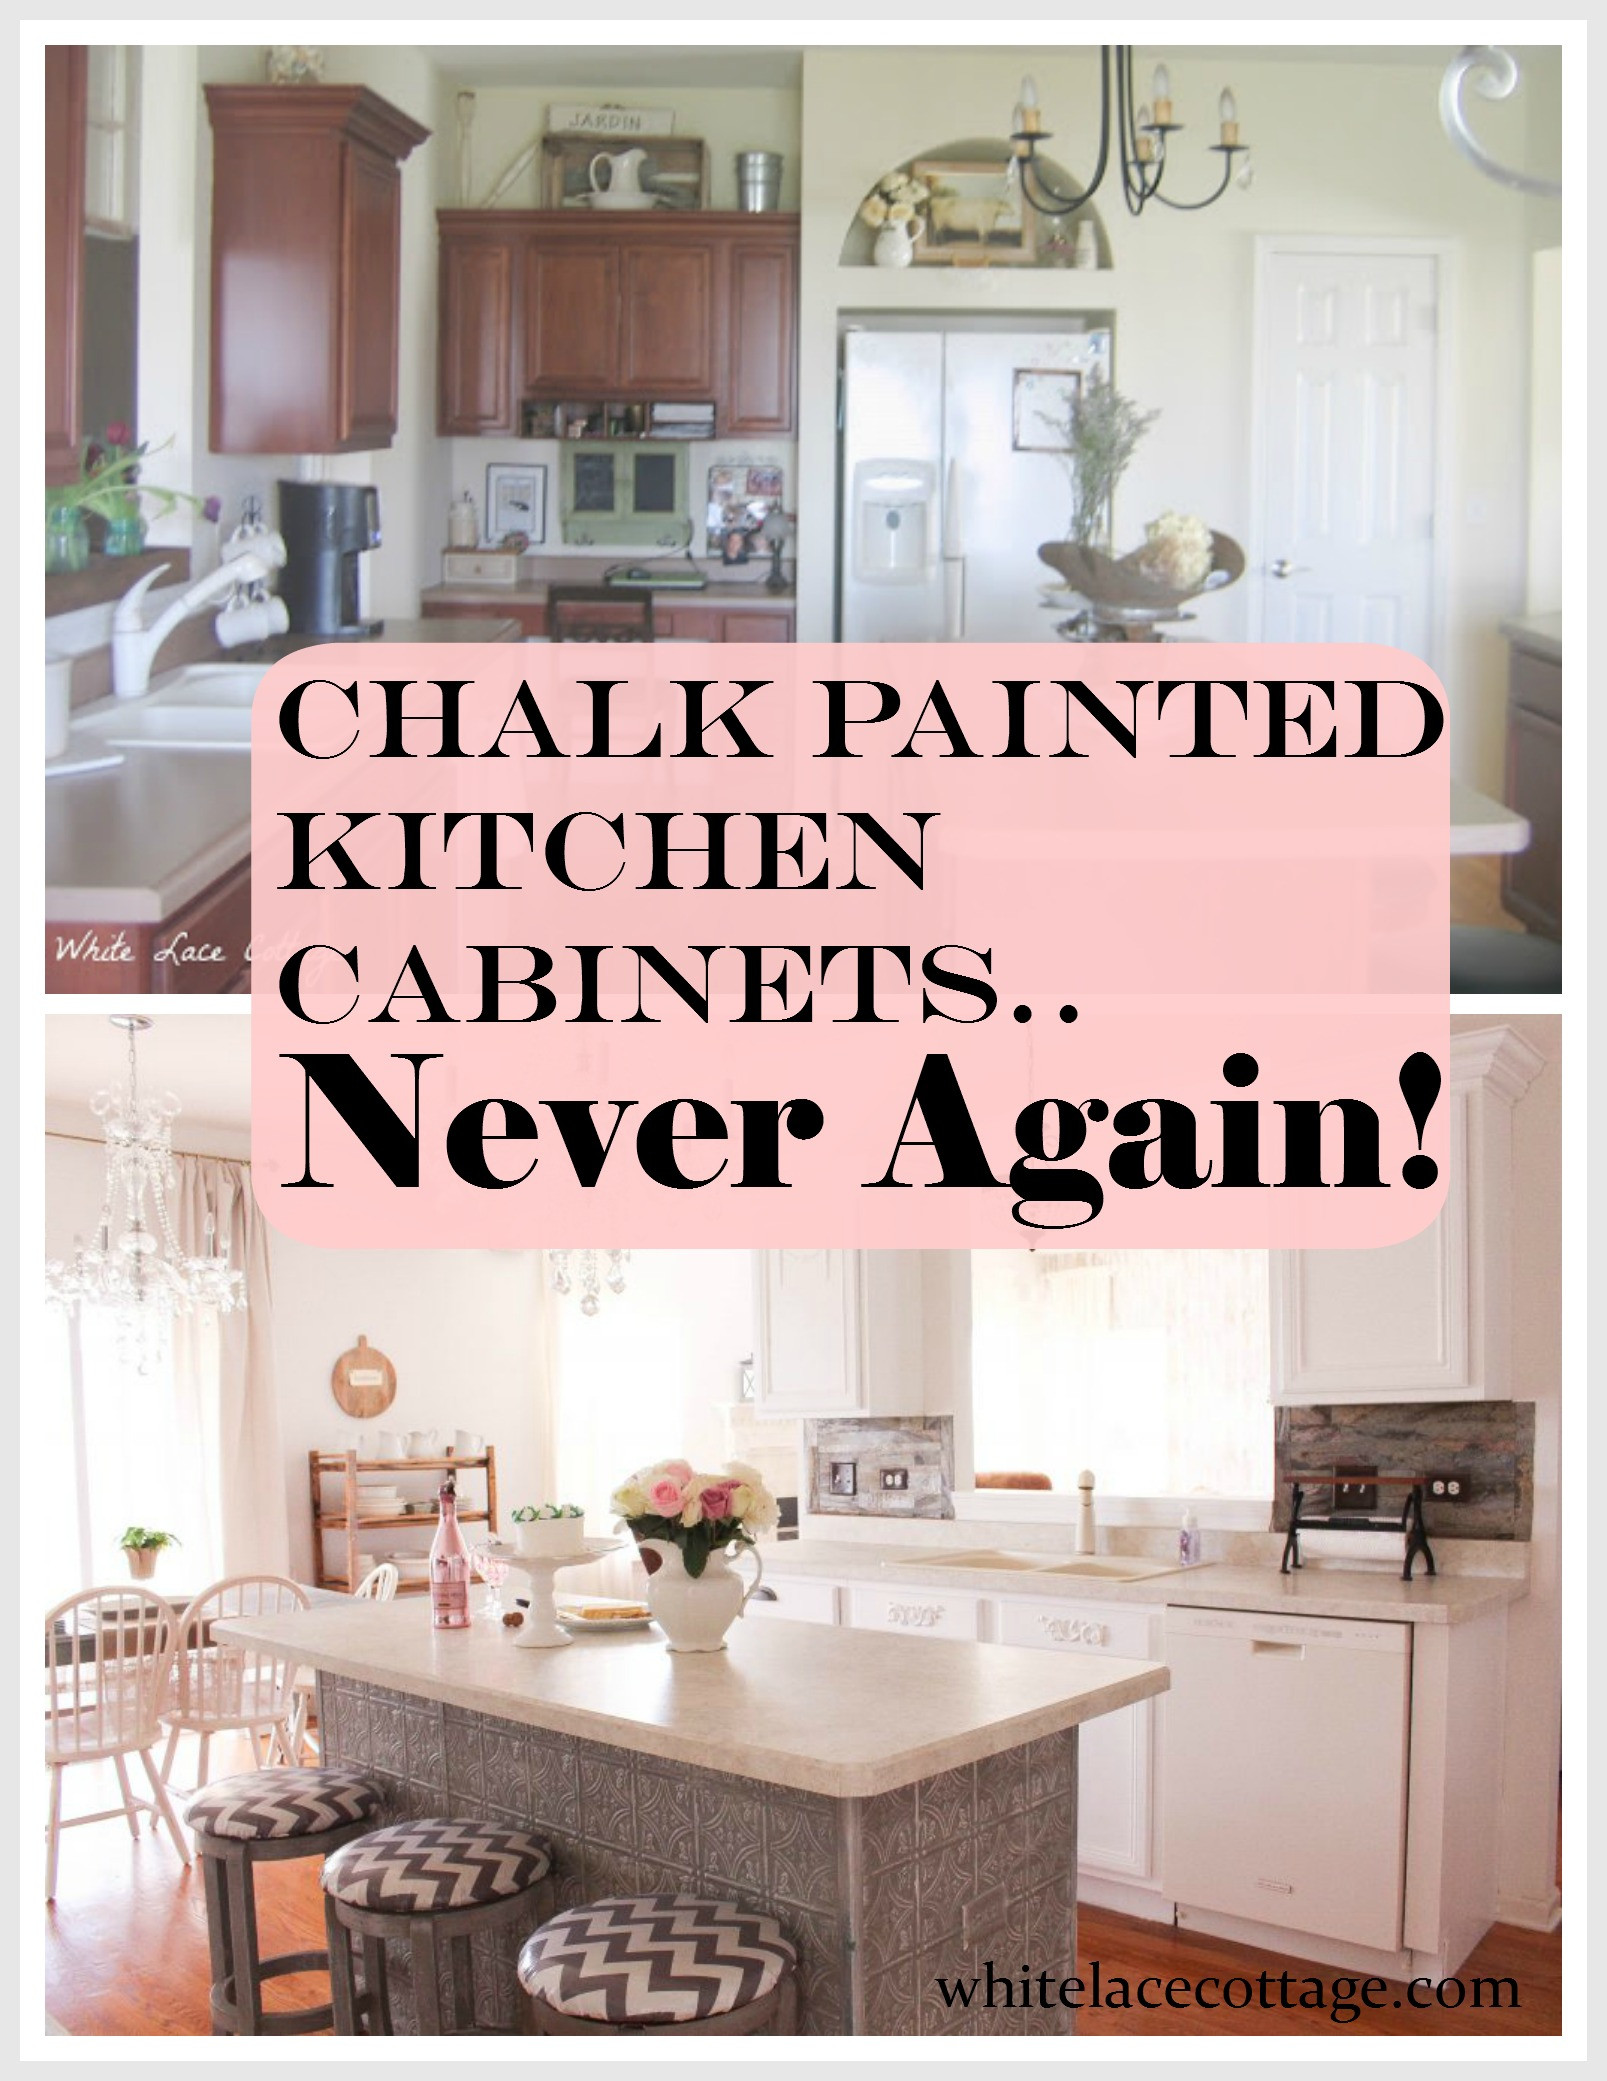 Chalk Paint Kitchen Cabinets Before And After
 Chalk Painted Kitchen Cabinets Never Again White Lace